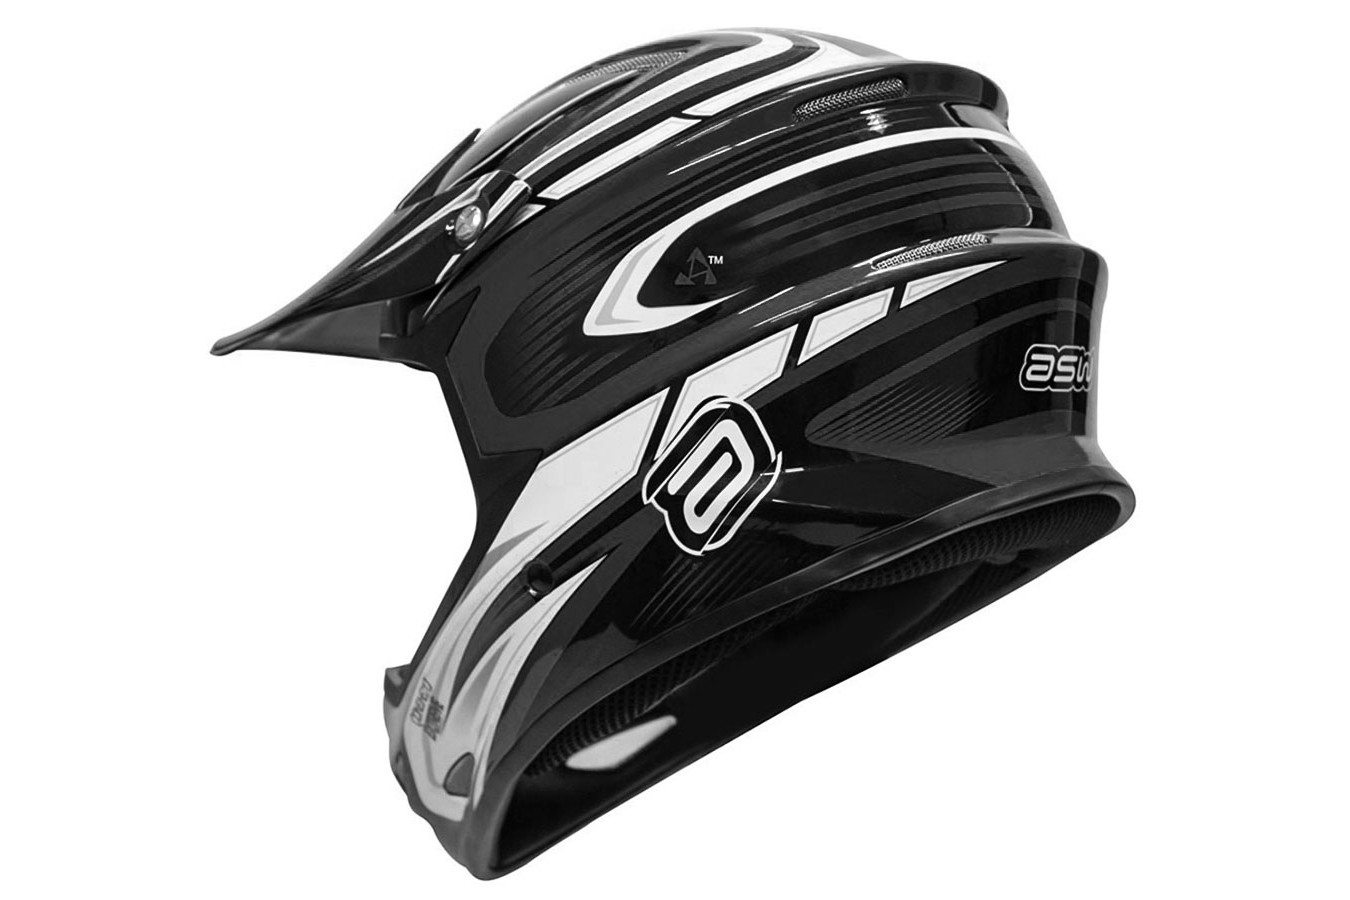 Capacete Ciclista Extreme - ASW